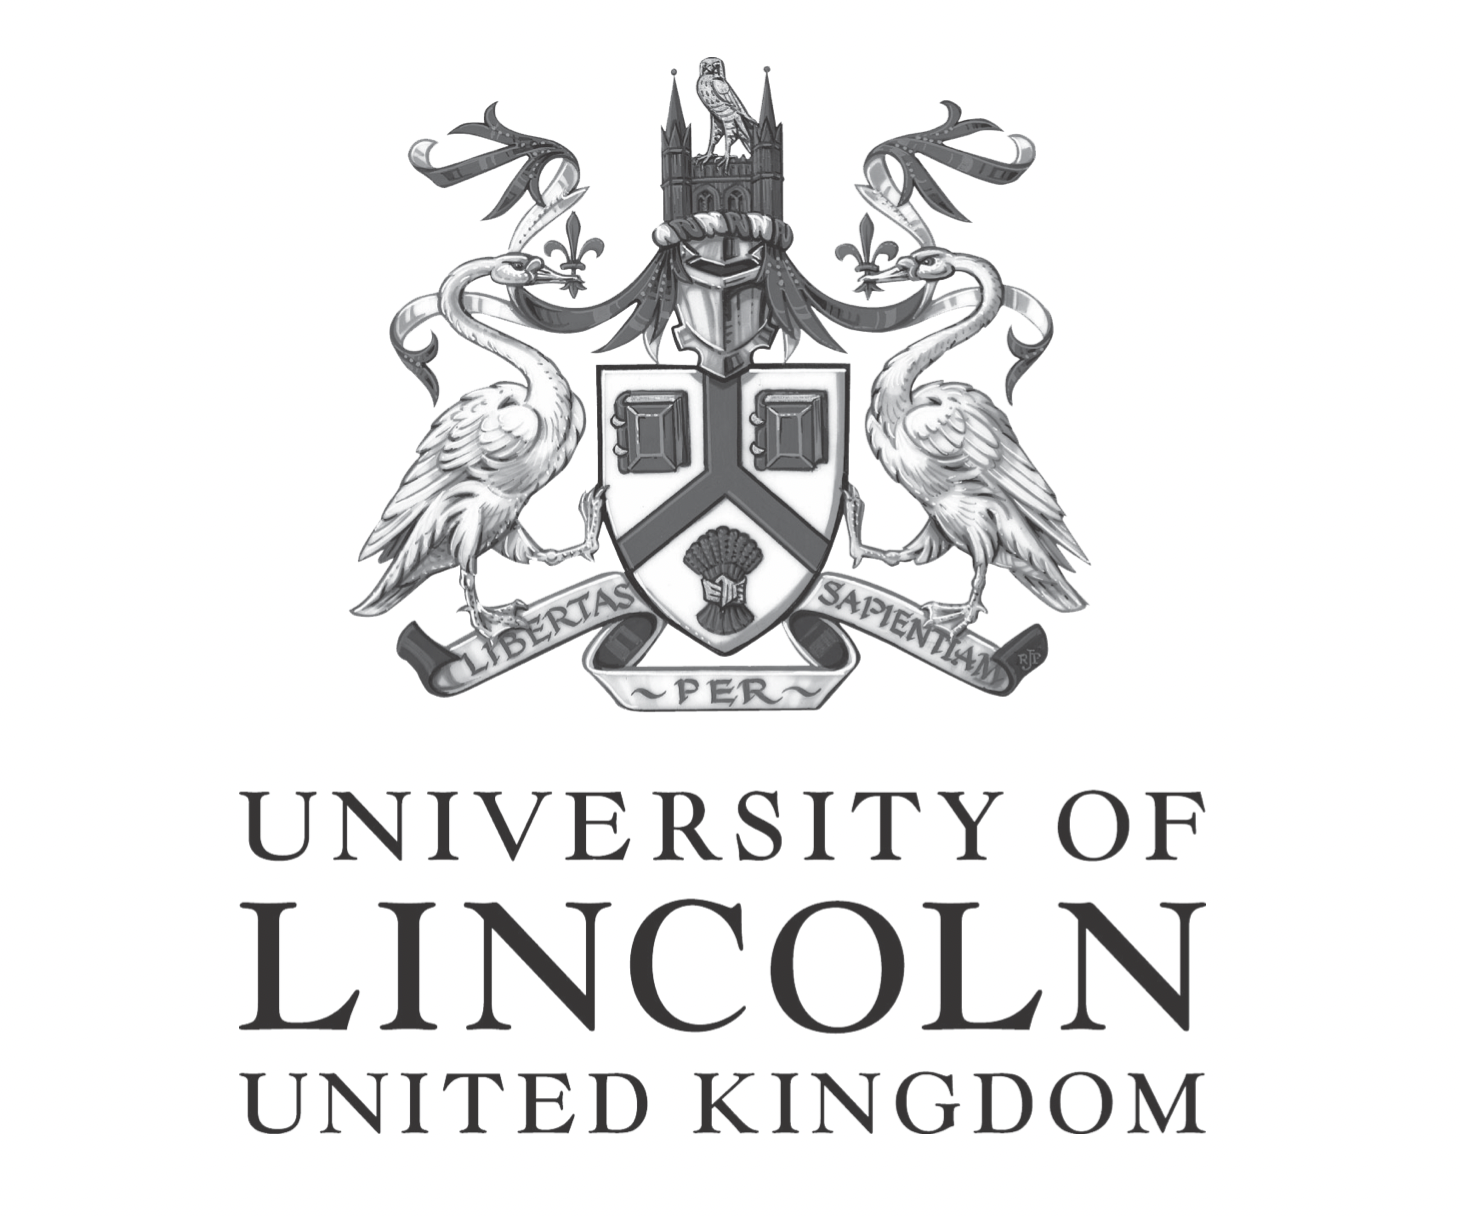 Study at University of Lincoln